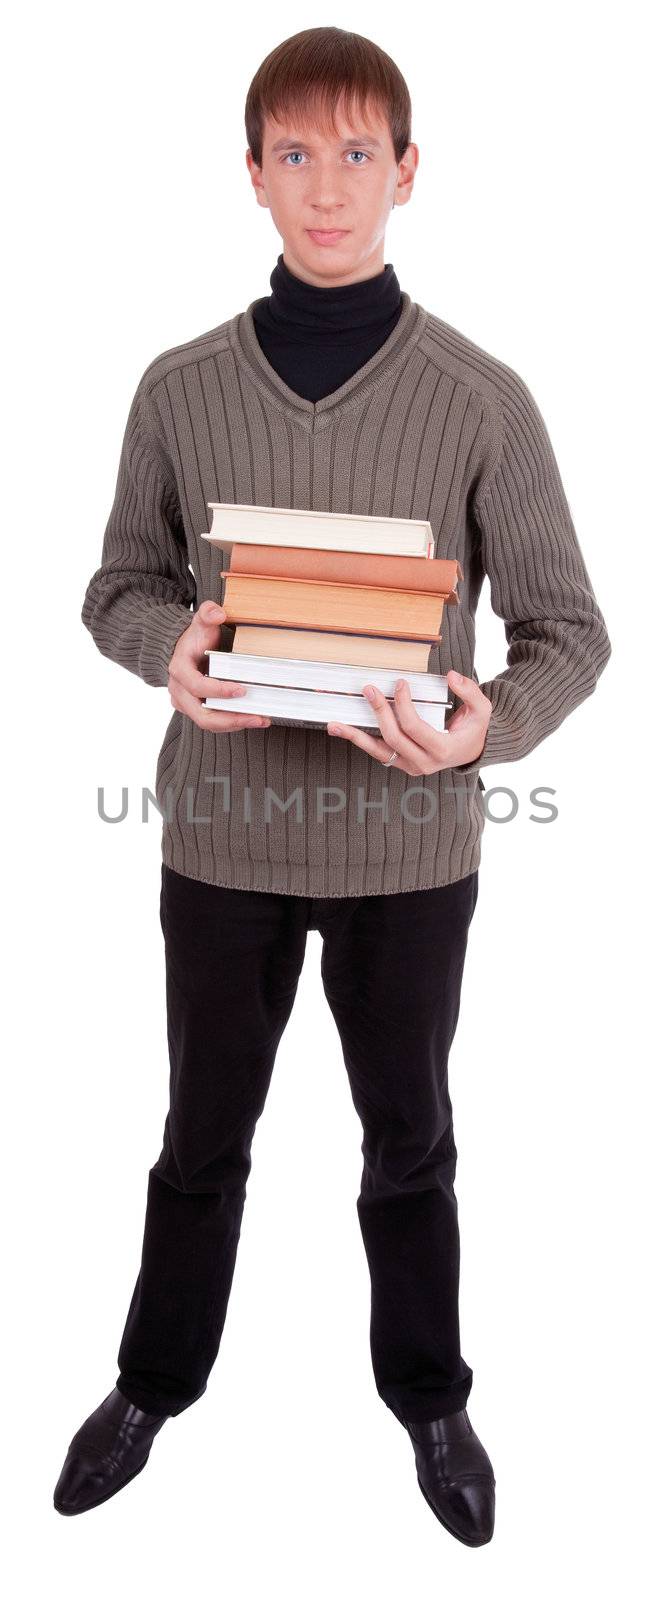 student with books by Sergieiev